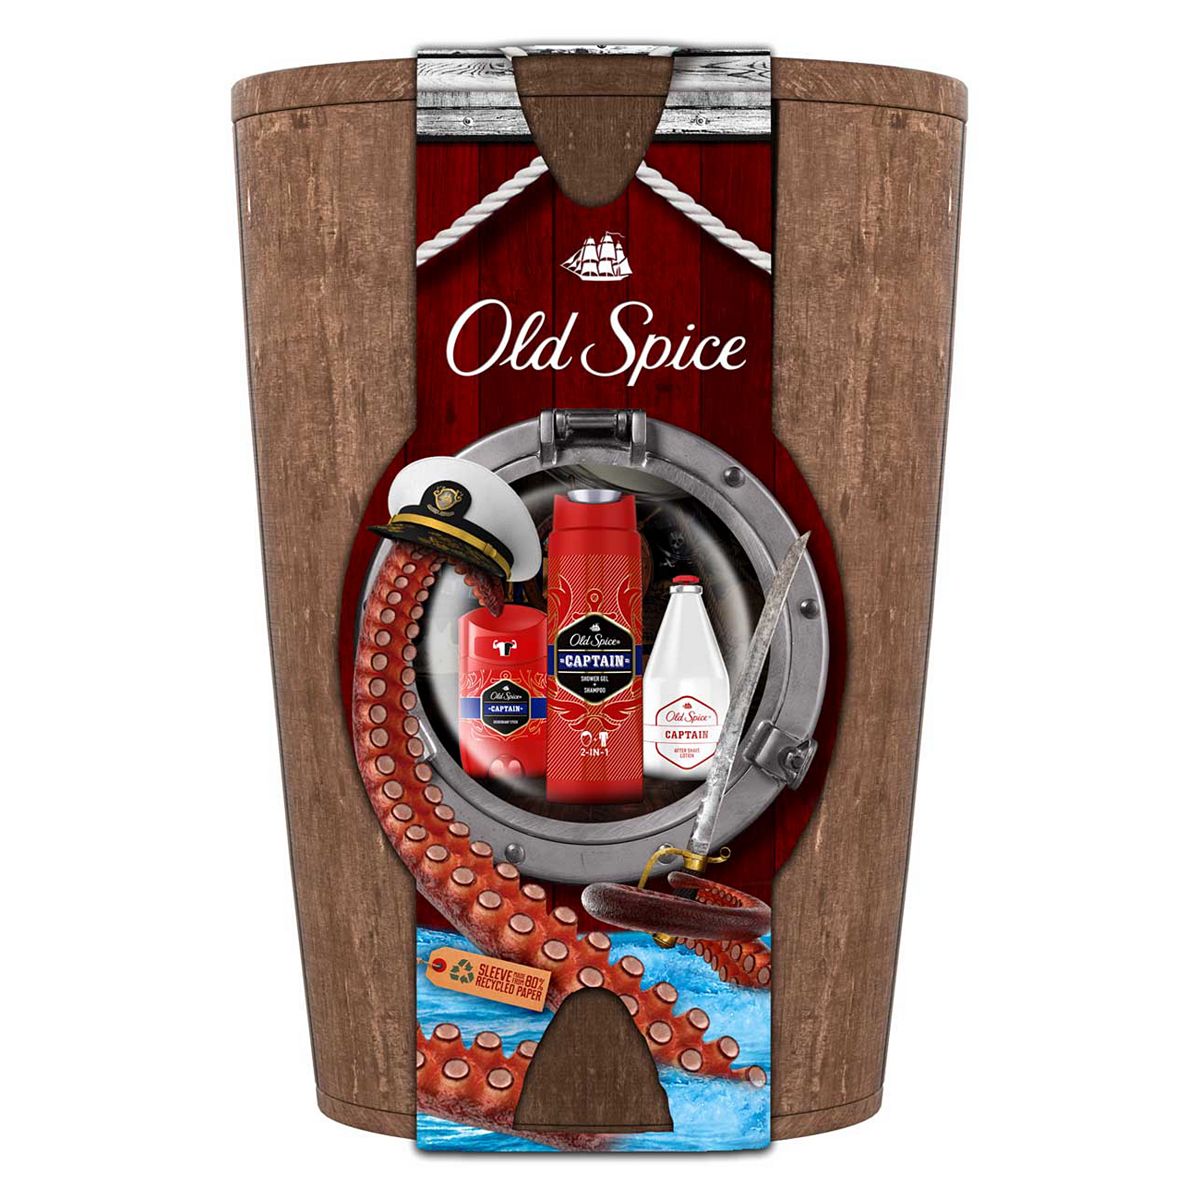 Old Spice Wooden Barrel Gift Set For Men With 3 Captain Products